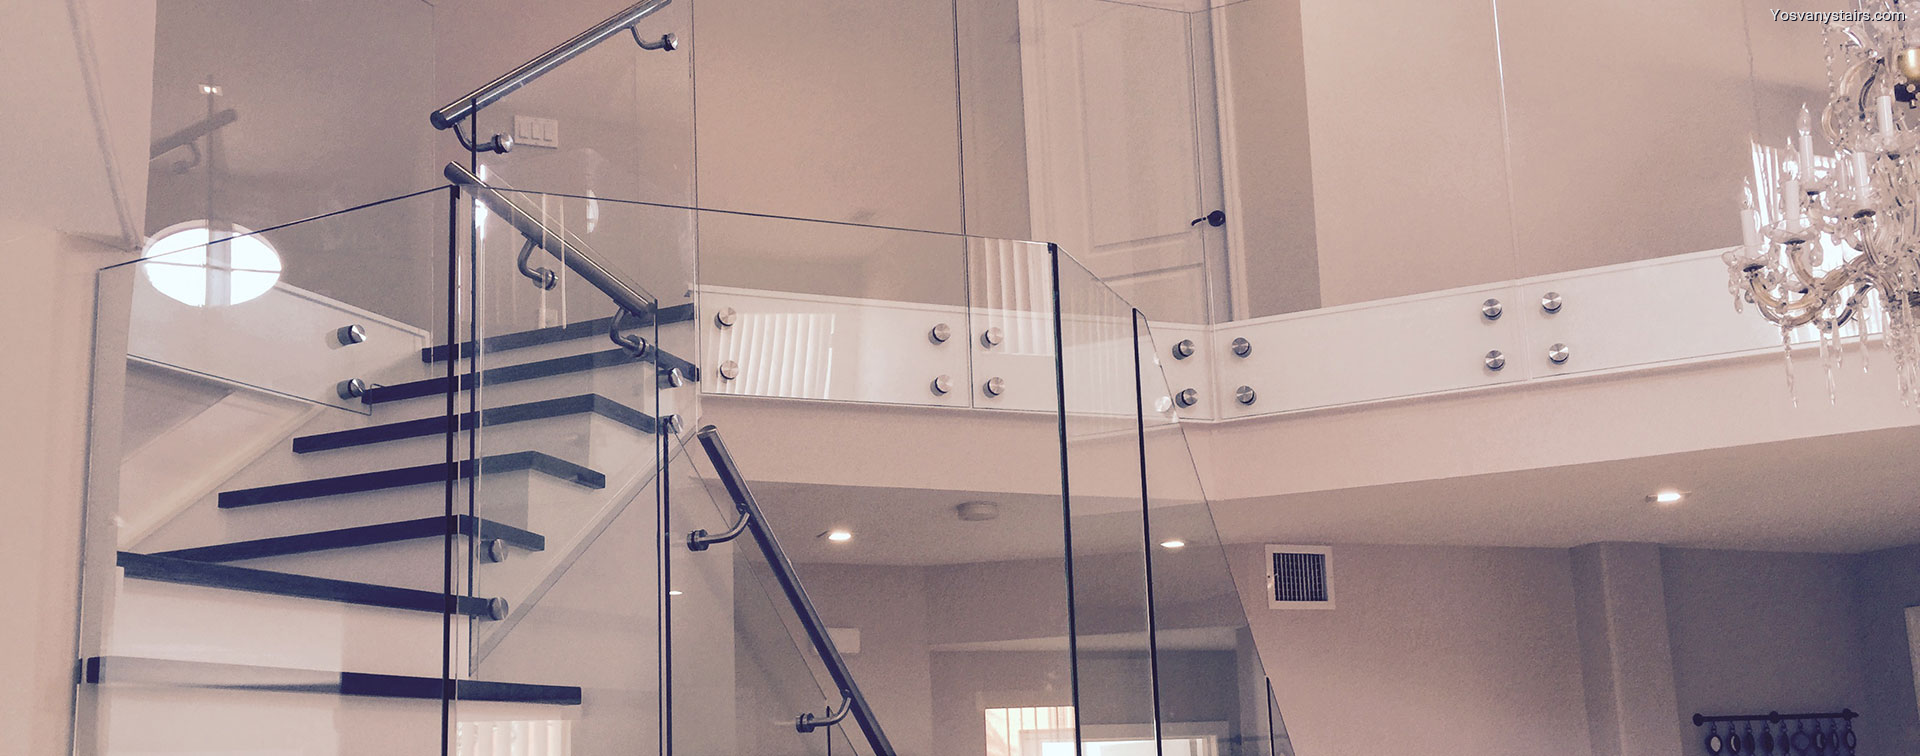 Miami install and remodeling stair and railing